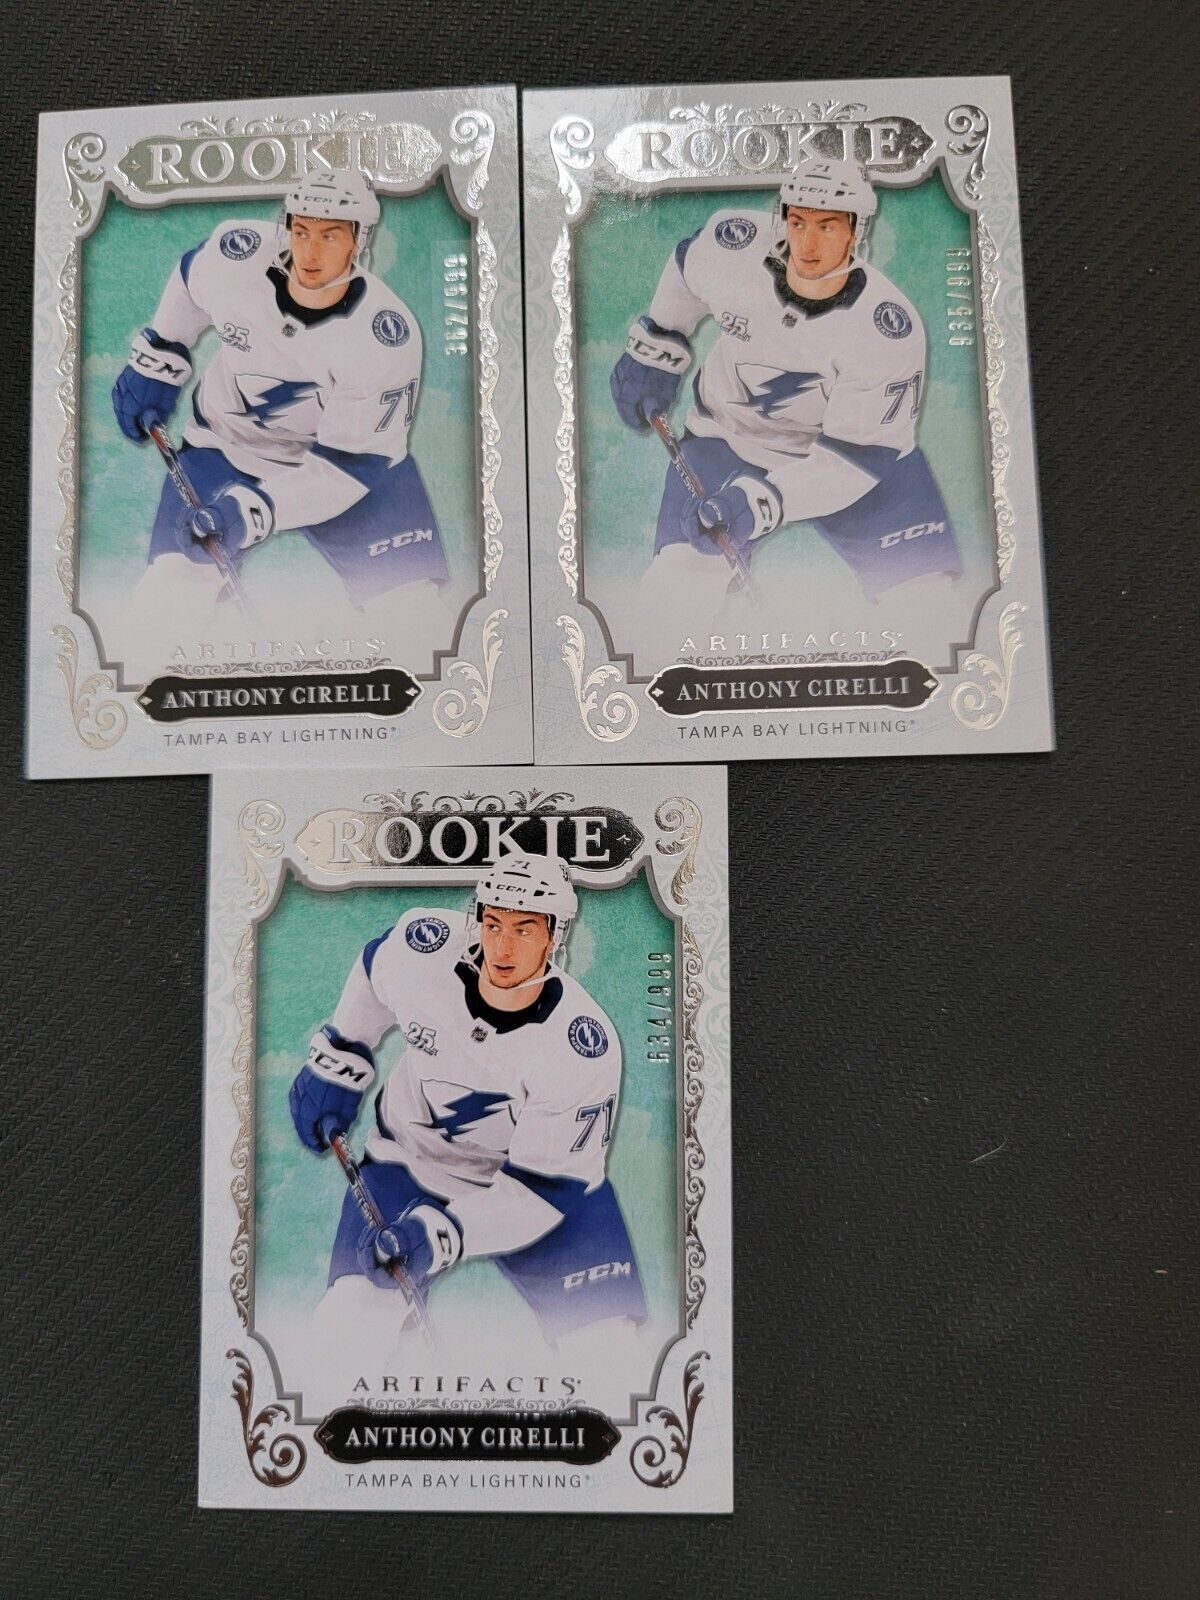 2018-19 UPPER DECK UD ARTIFACTS ANTHONY CIRELLI #174 #ed /999 ROOKIE 3 CARD LOT. rookie card picture